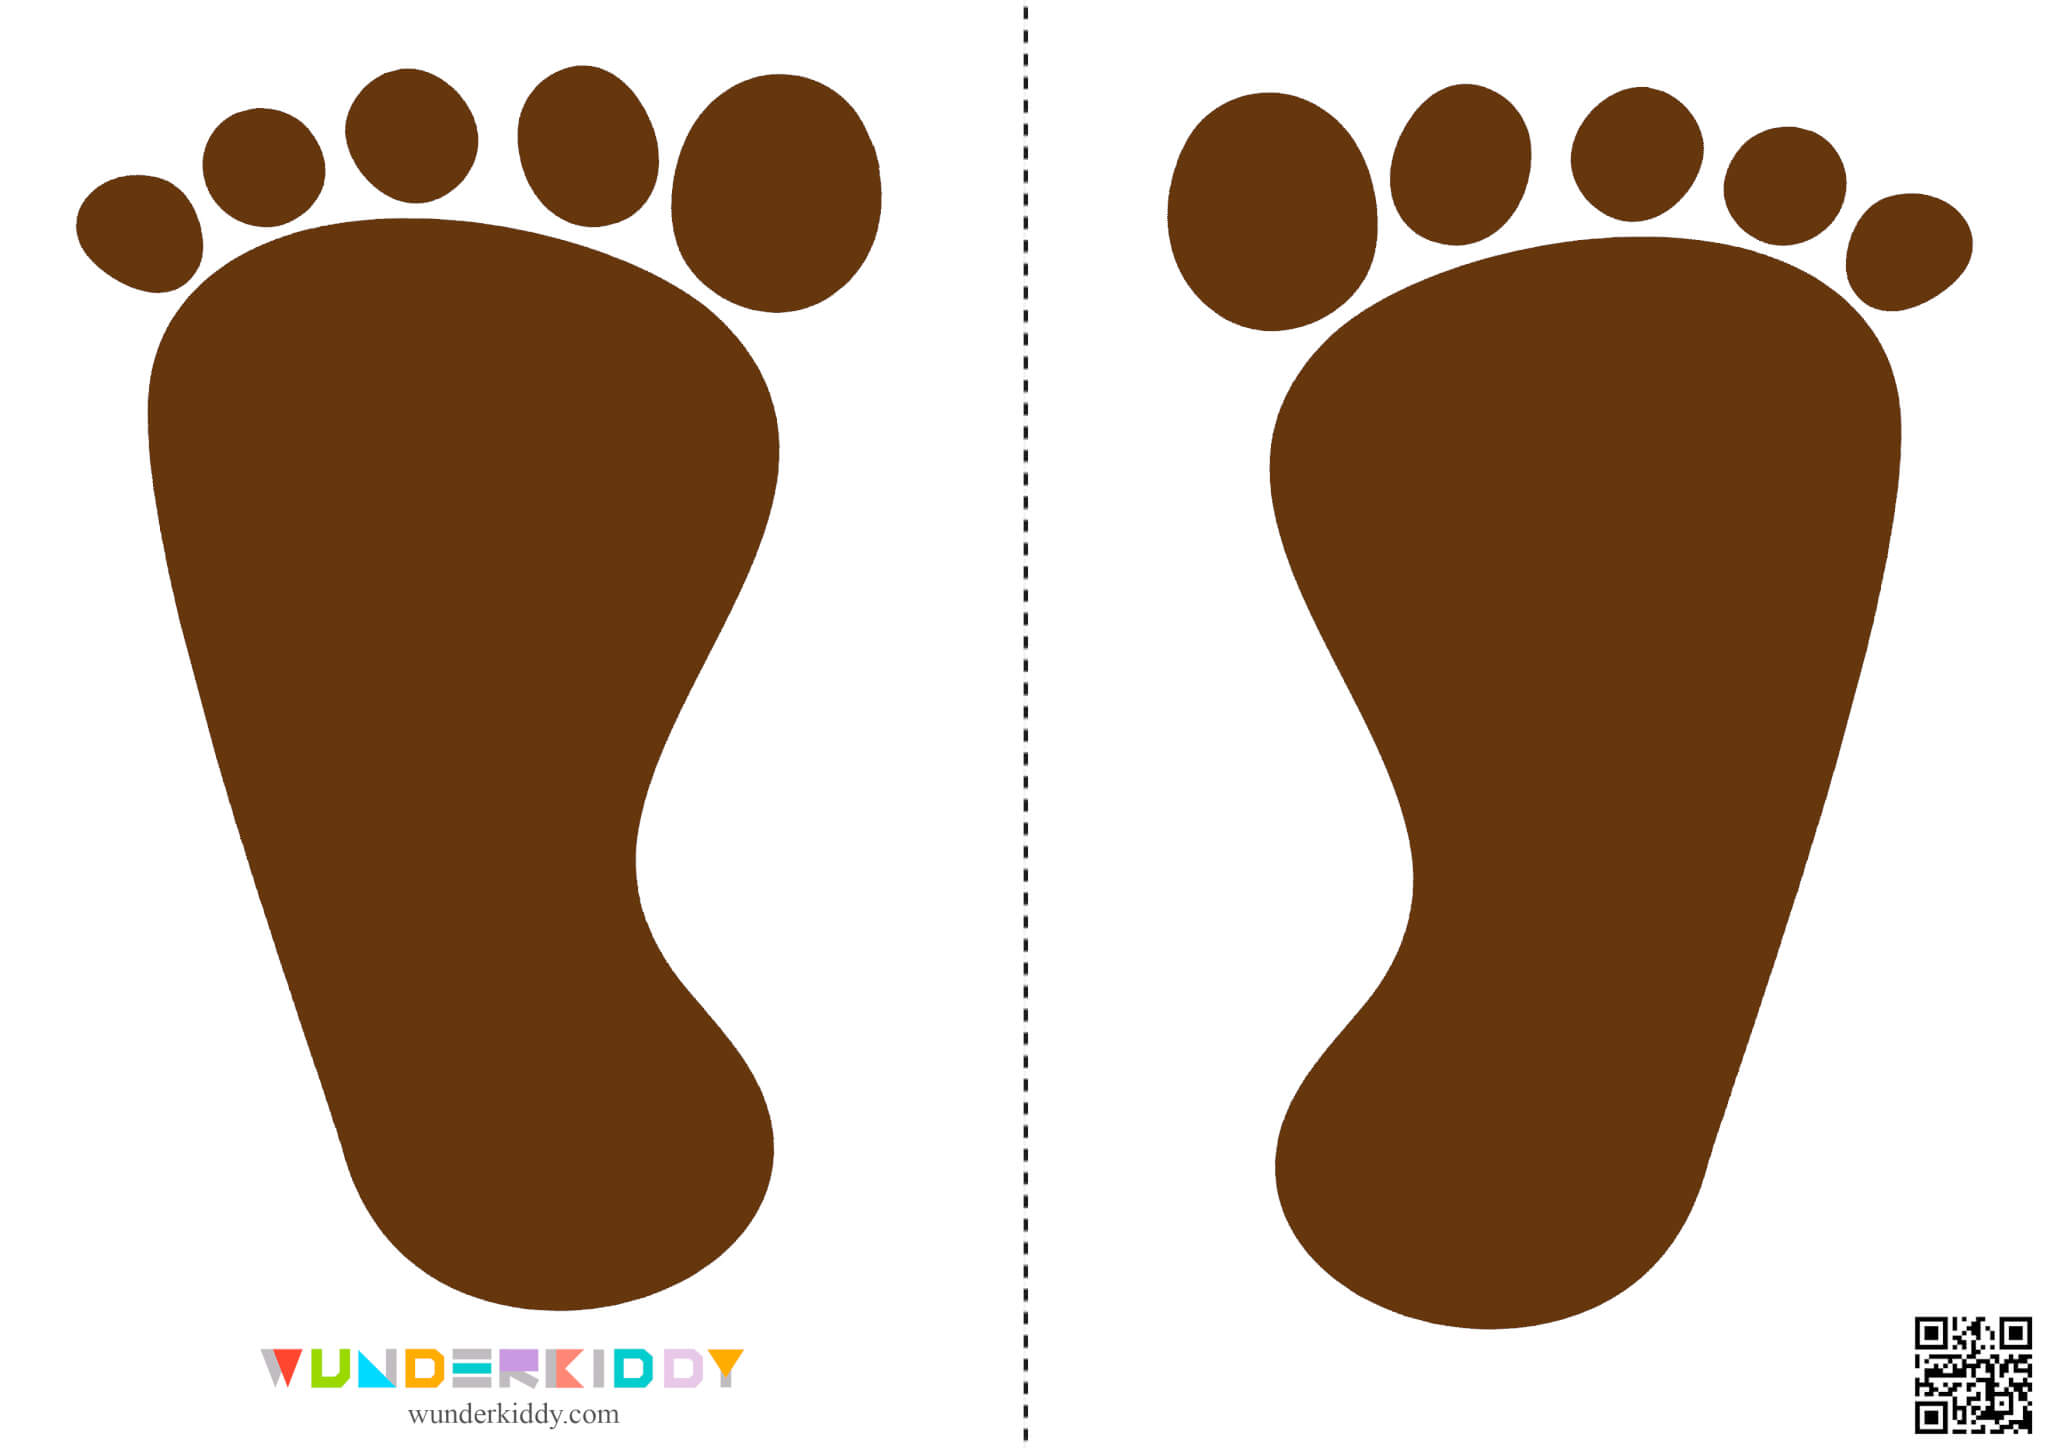 Hands and Feet Color Sensory Path - Image 20